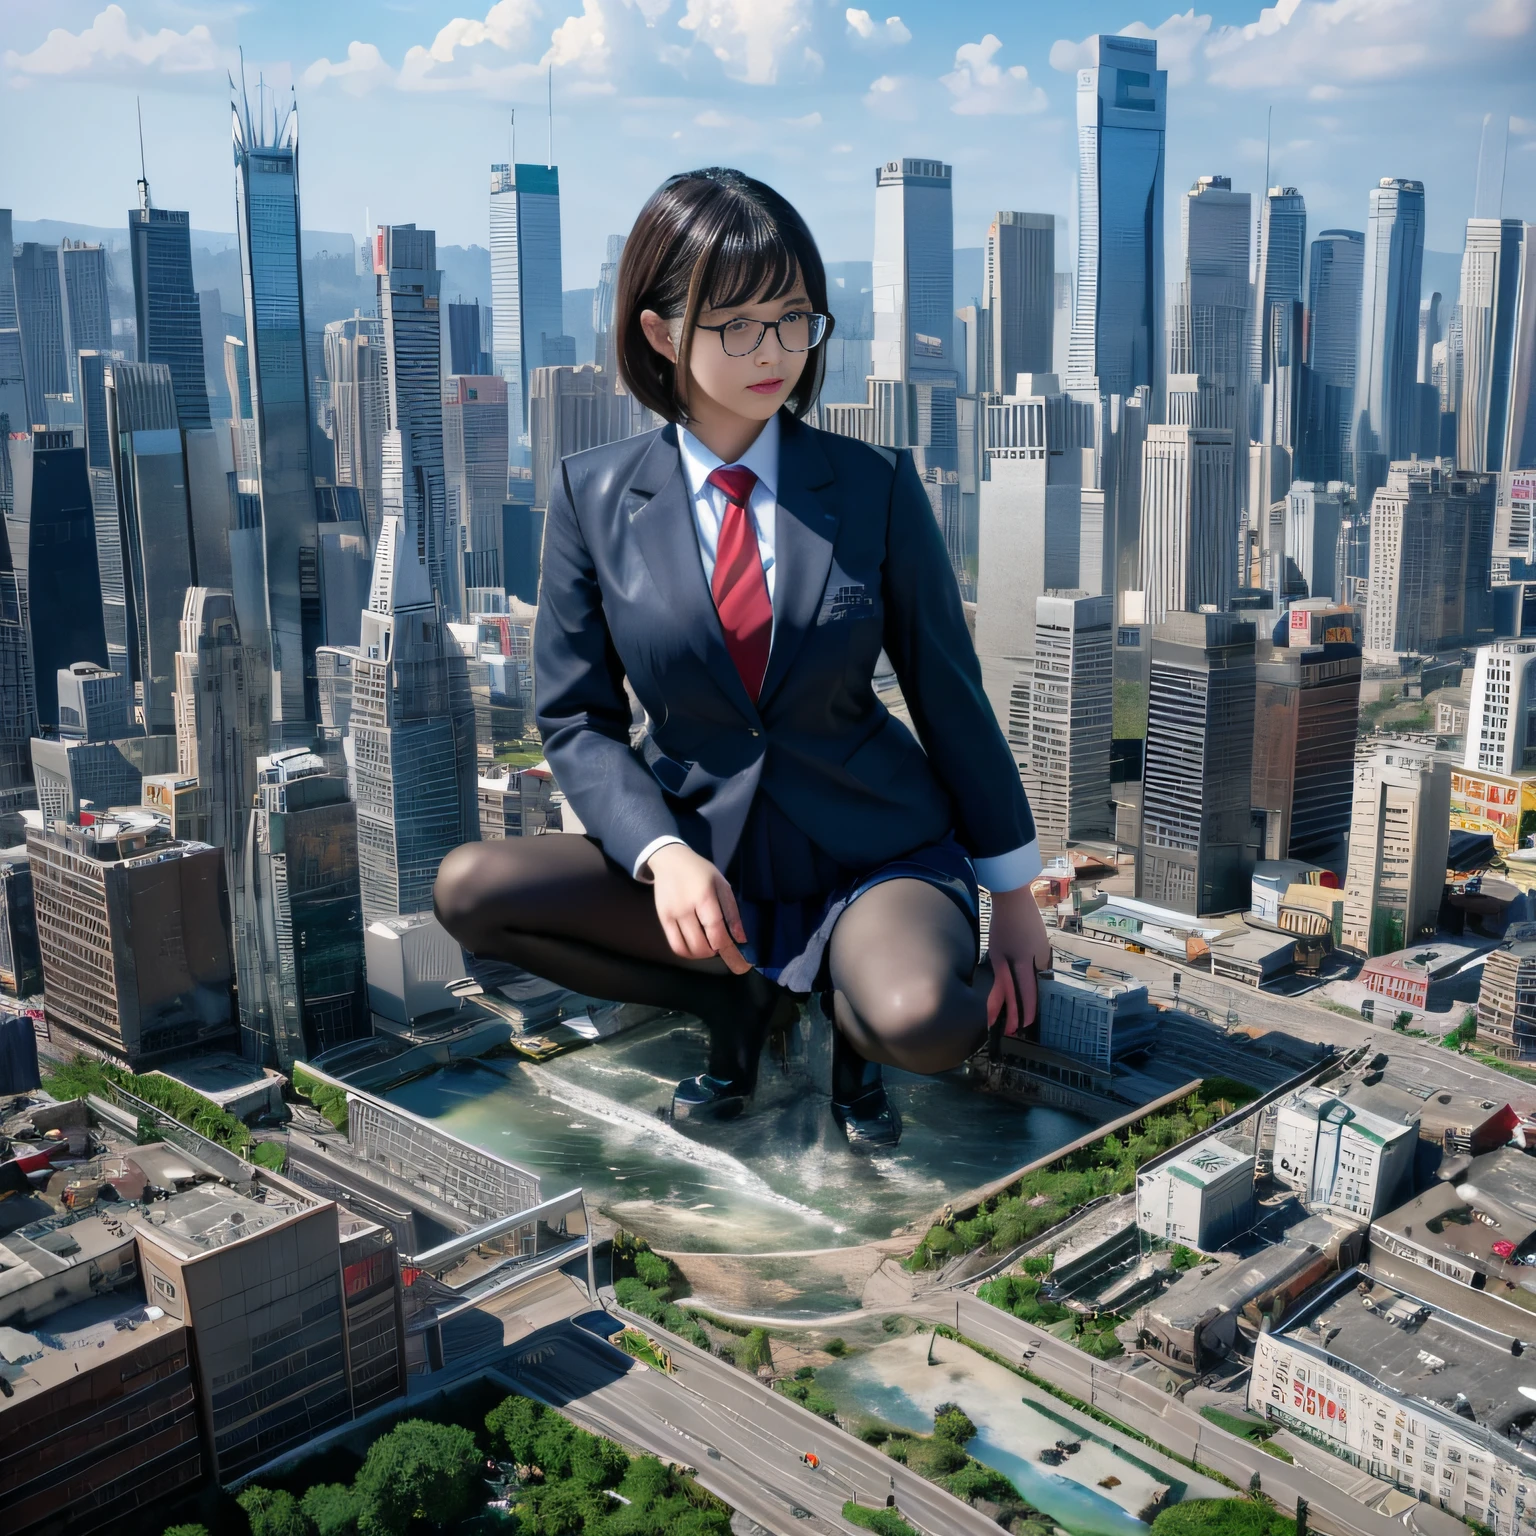 Multiple girls, giantess art, a hyperrealistic , , highly detailed giantess shot, der riese, Shorthair, Black pantyhose, Giant high school girl much bigger than a skyscraper。Wearing rimless glasses。Colossal 。Navy blue blazer、Red tie、Mini Length Skirt、Black pantyhose、I'm not wearing shoes.。very small metropoliiniature metropolis。In a miniature metropolis just a few feet tall.、squatting and urinating。Urine that comes out forcefully。torrent of urine。sea of urine。Small trains and cars are washed away with urine.。Full body depiction。nffsw, der riese, Black pantyhose, Pantyhose legs, Pantyhose feet, ,Stomping City,crash city,Small town,micro city, Peeing,